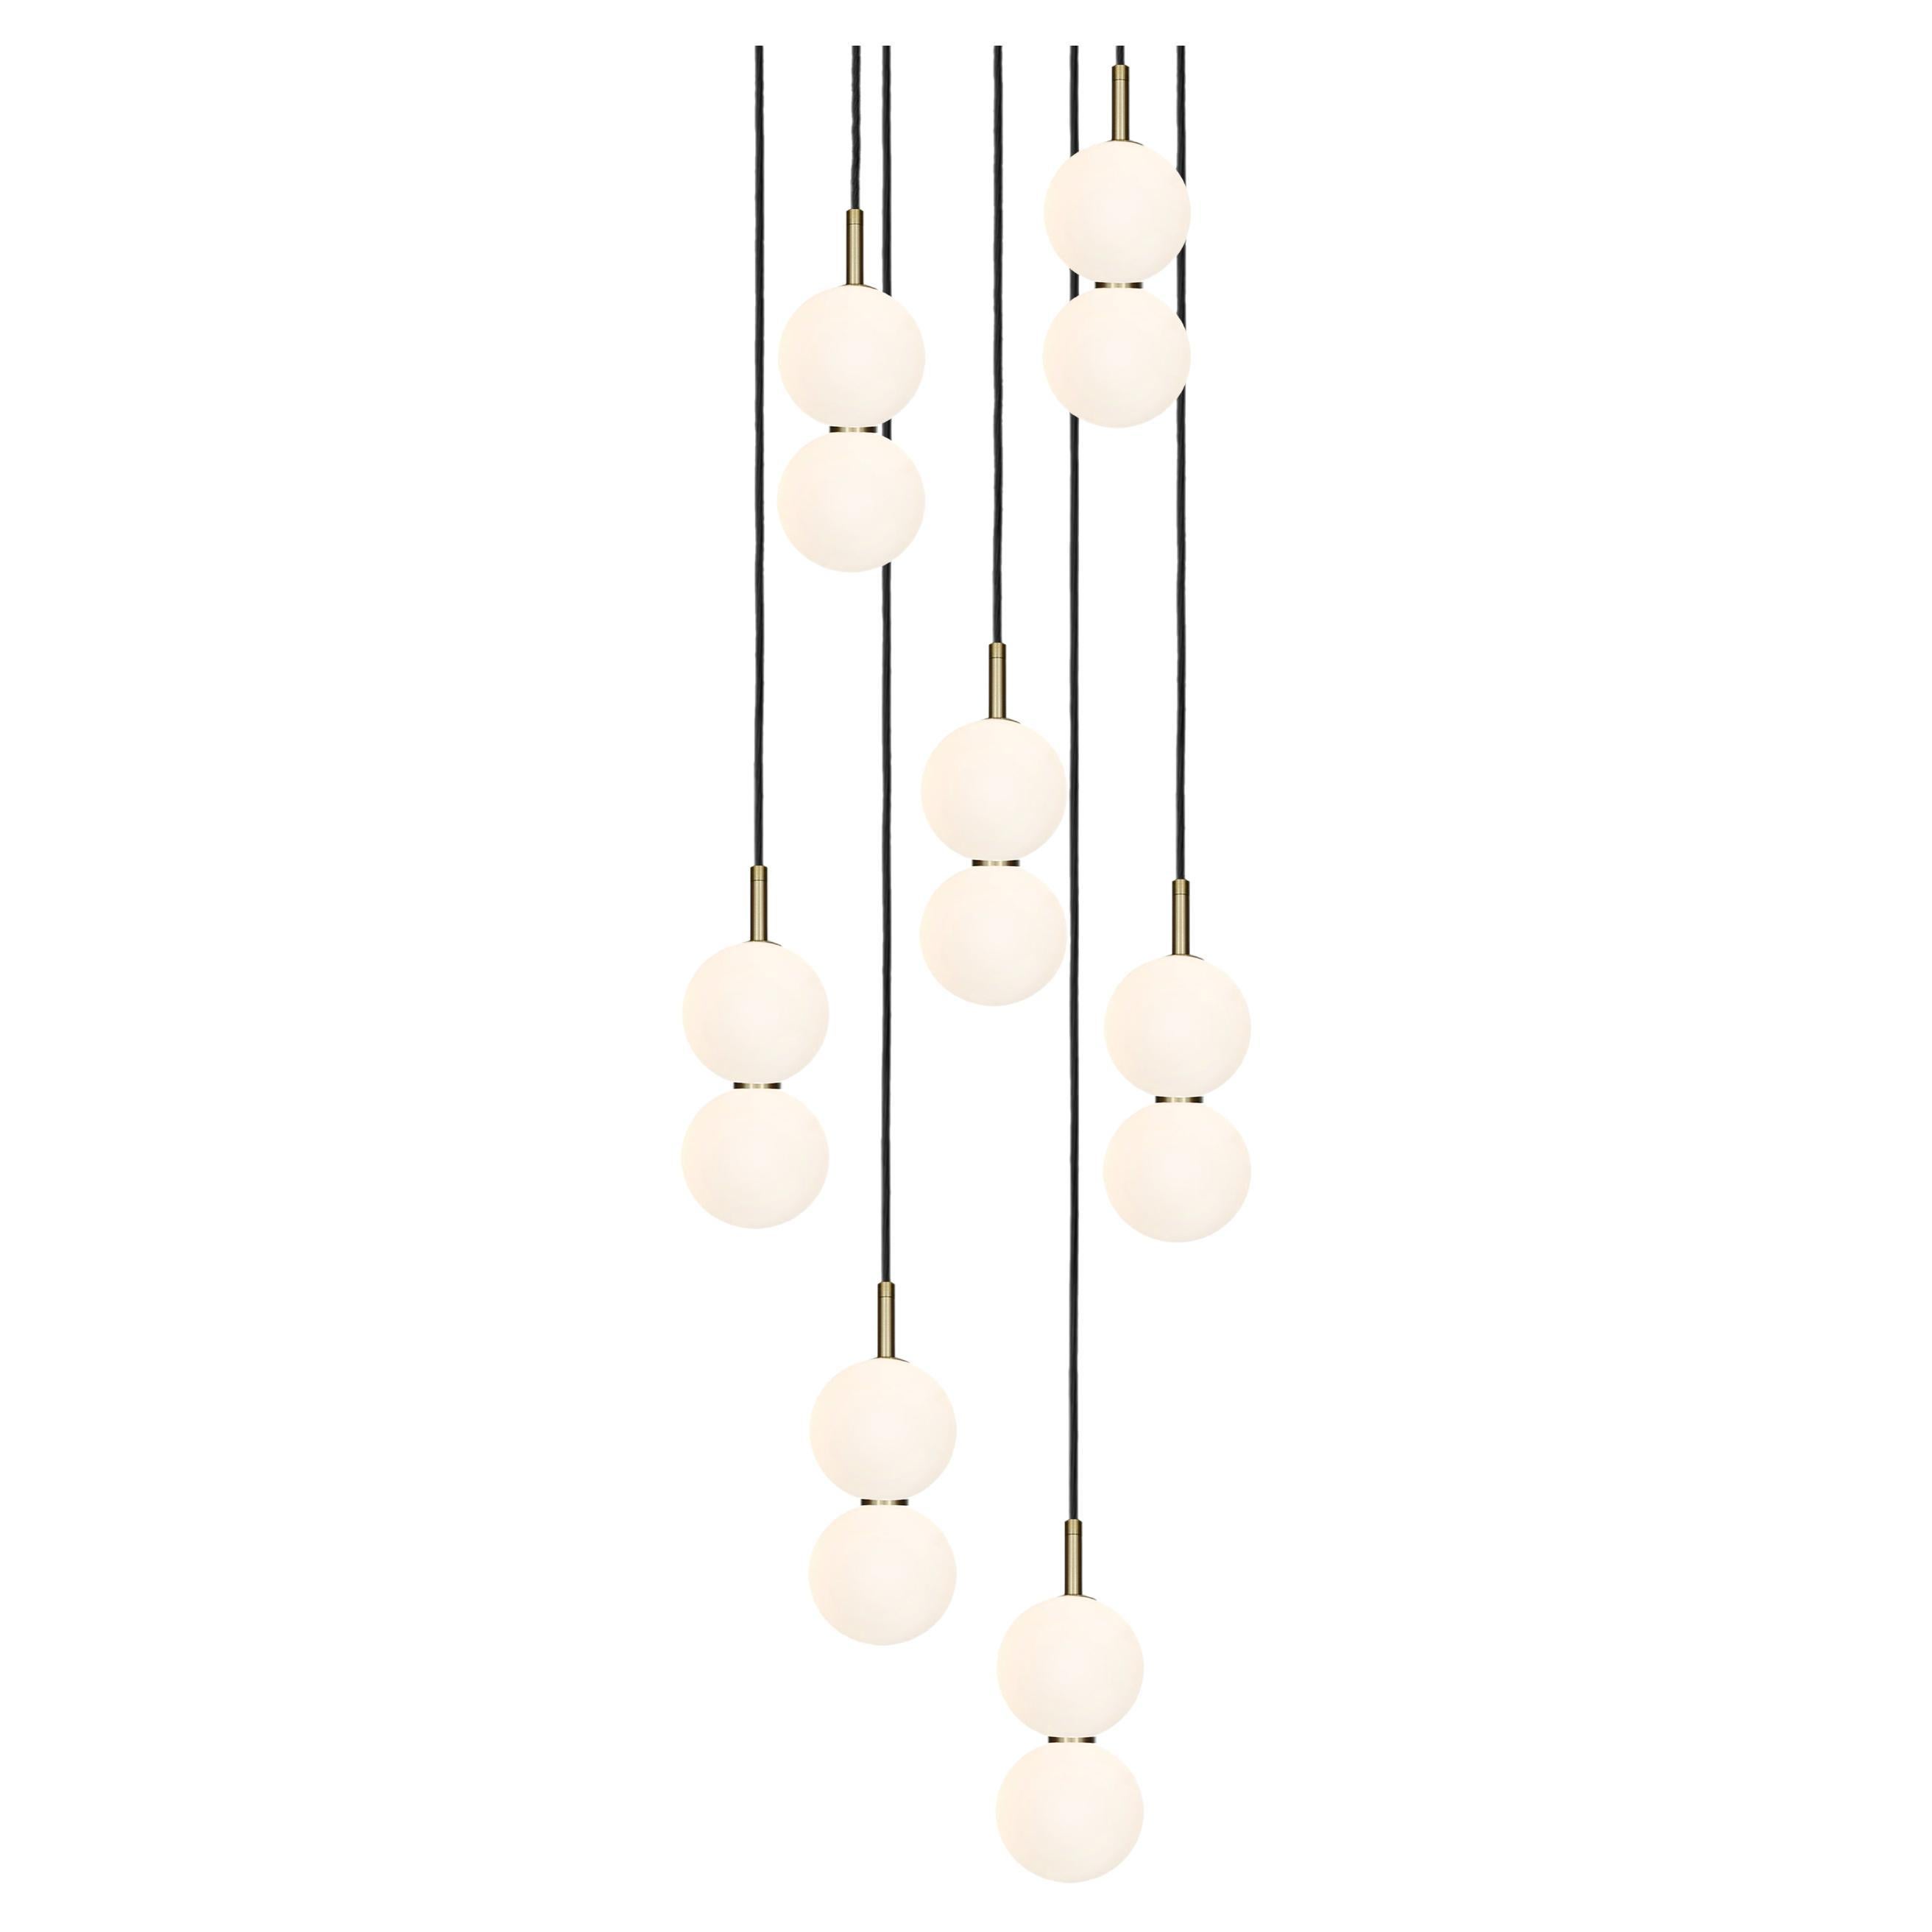 Echo Lamp Cluster, 7-Piece. Opal Glass Orbs, Brass Metalwork. Integrated LED